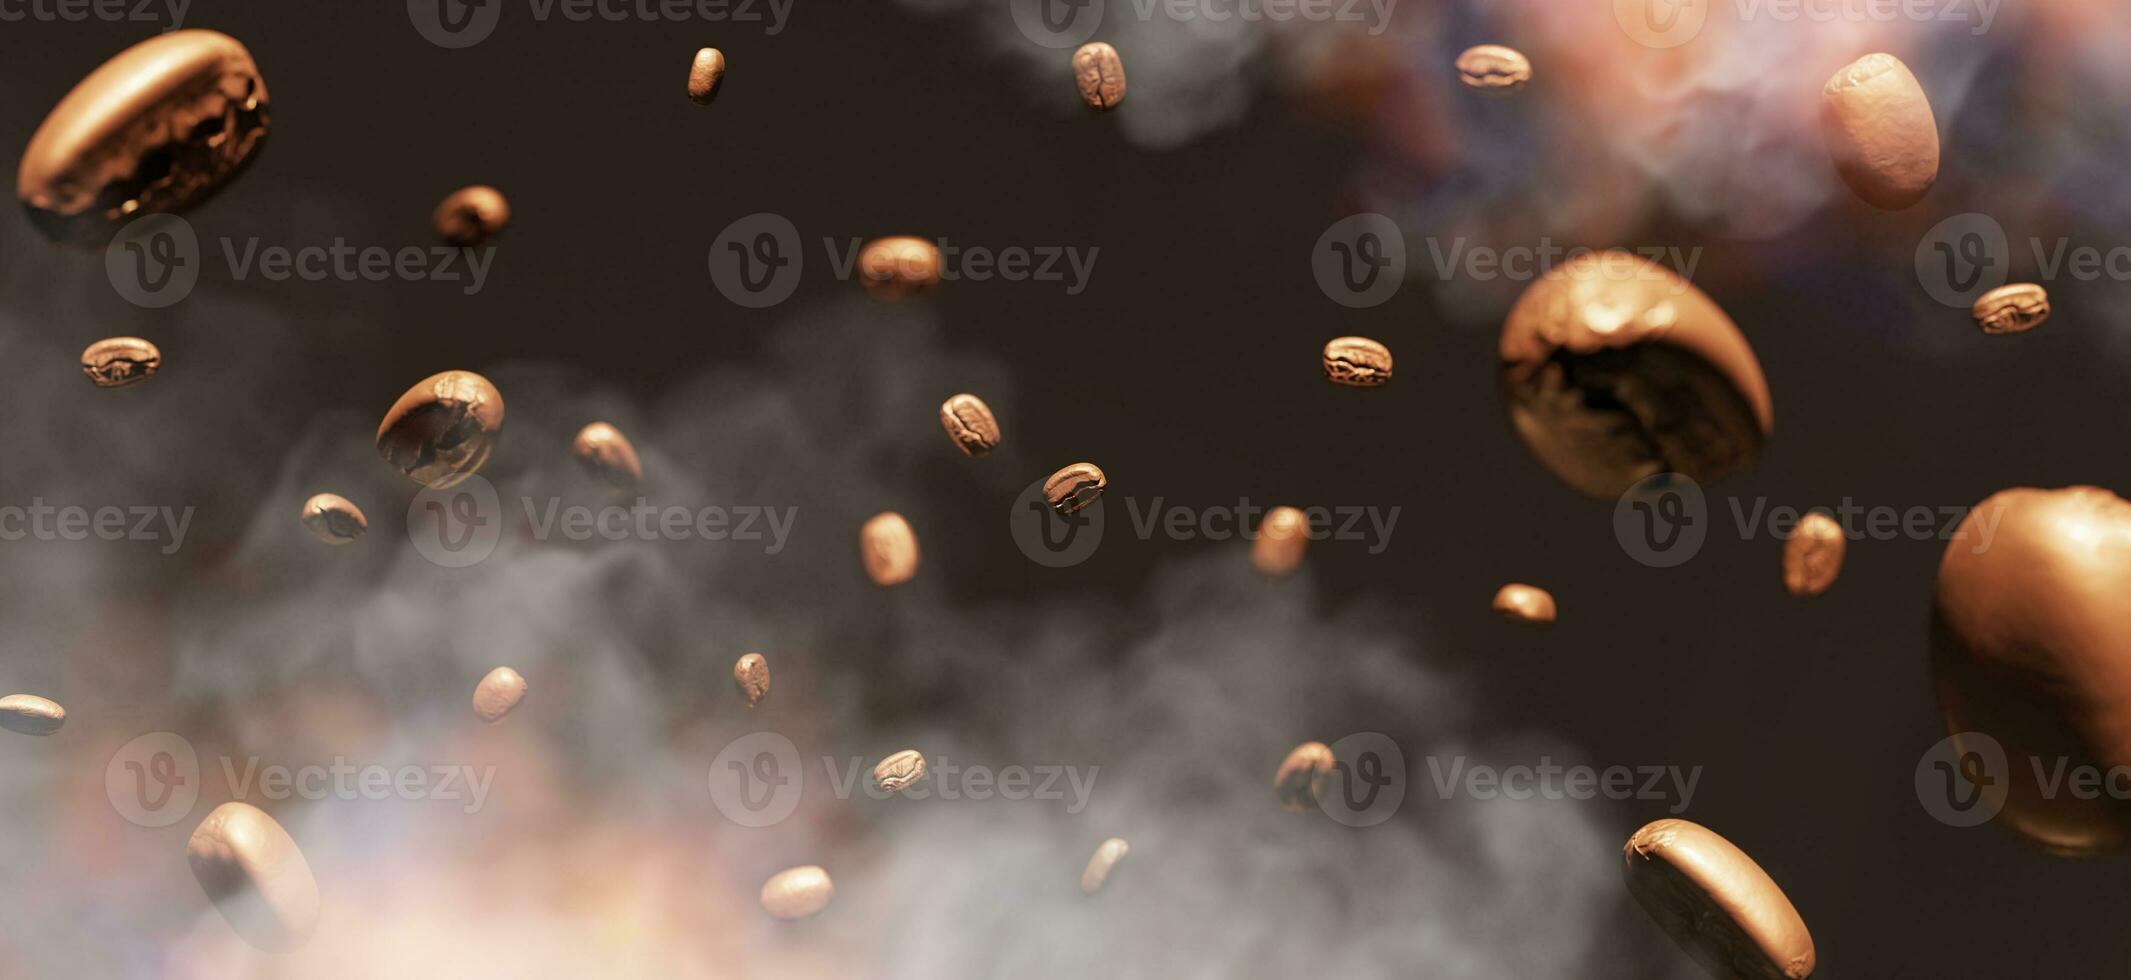 Roasted coffee beans floating in the air aroma freshly roasted coffee with smoke and fire Arabica Robusta 3D illustration photo